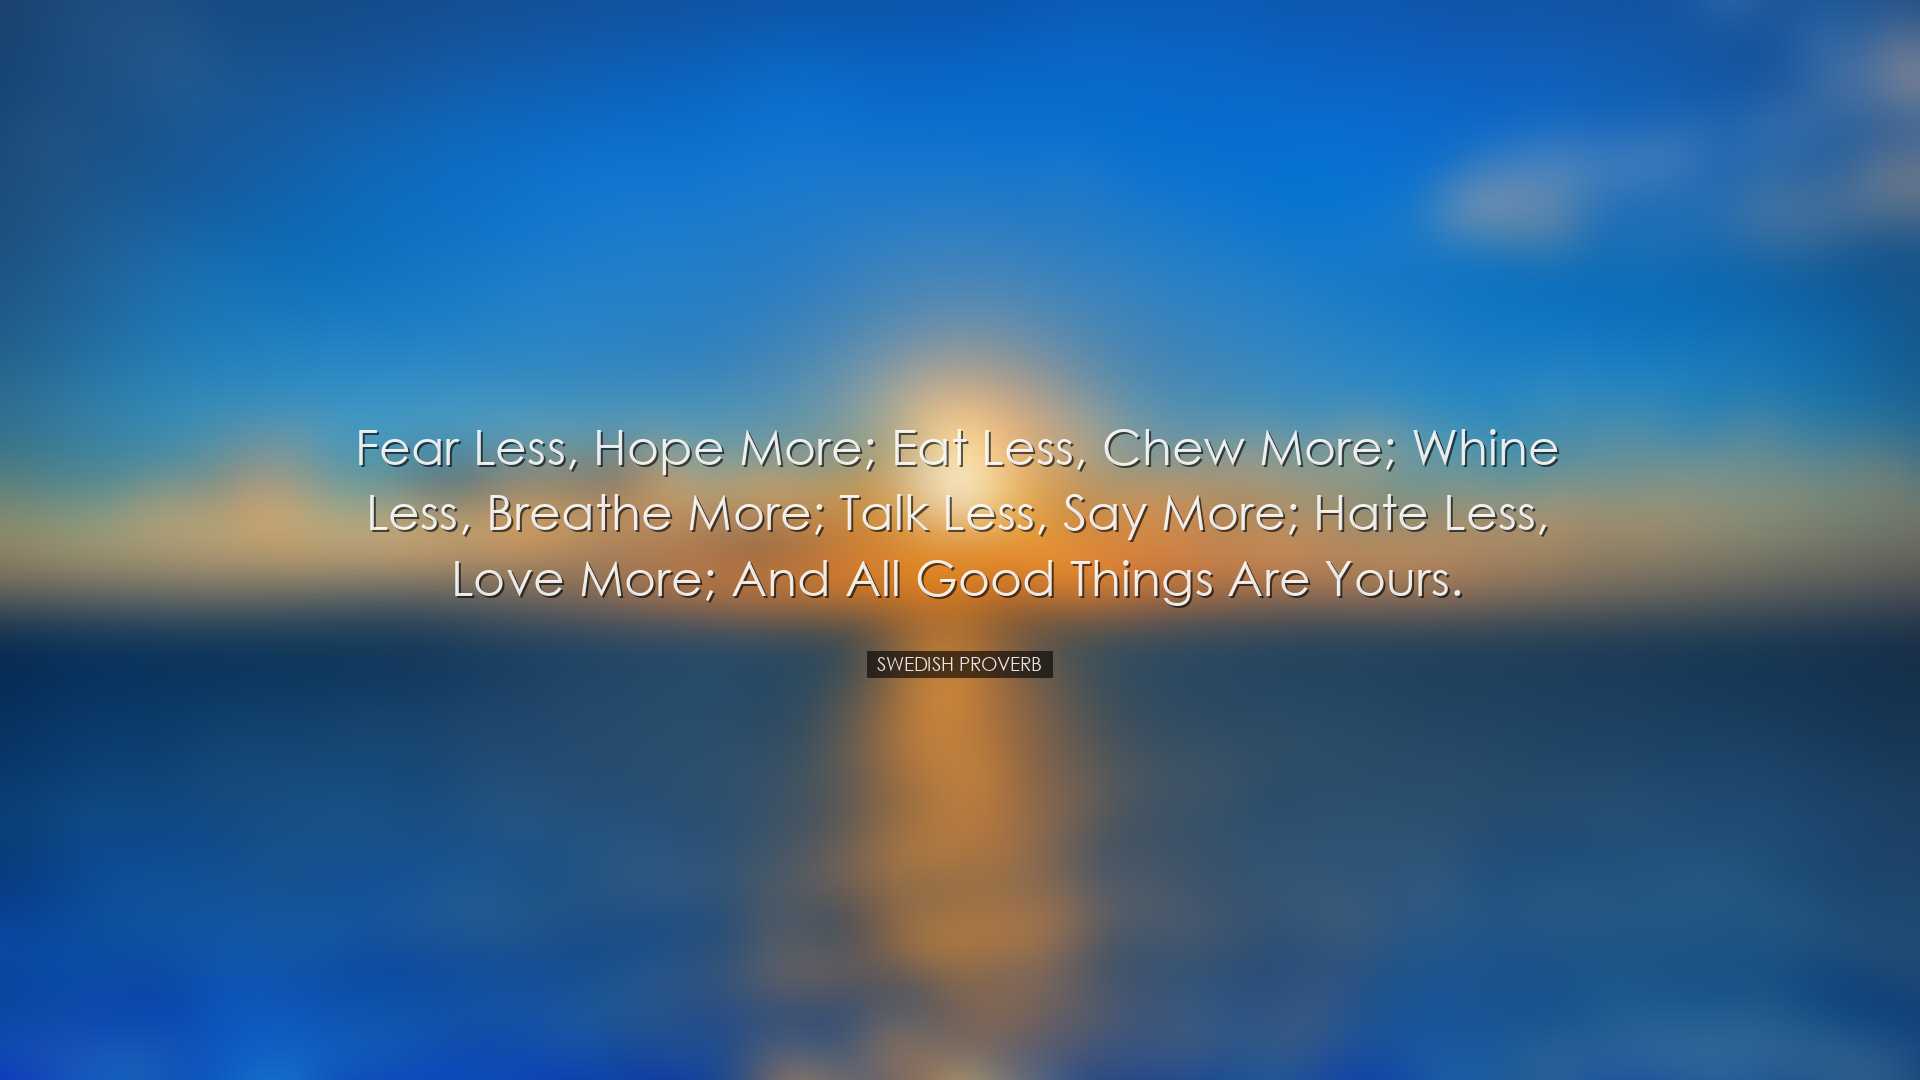 Fear less, hope more; eat less, chew more; whine less, breathe mor